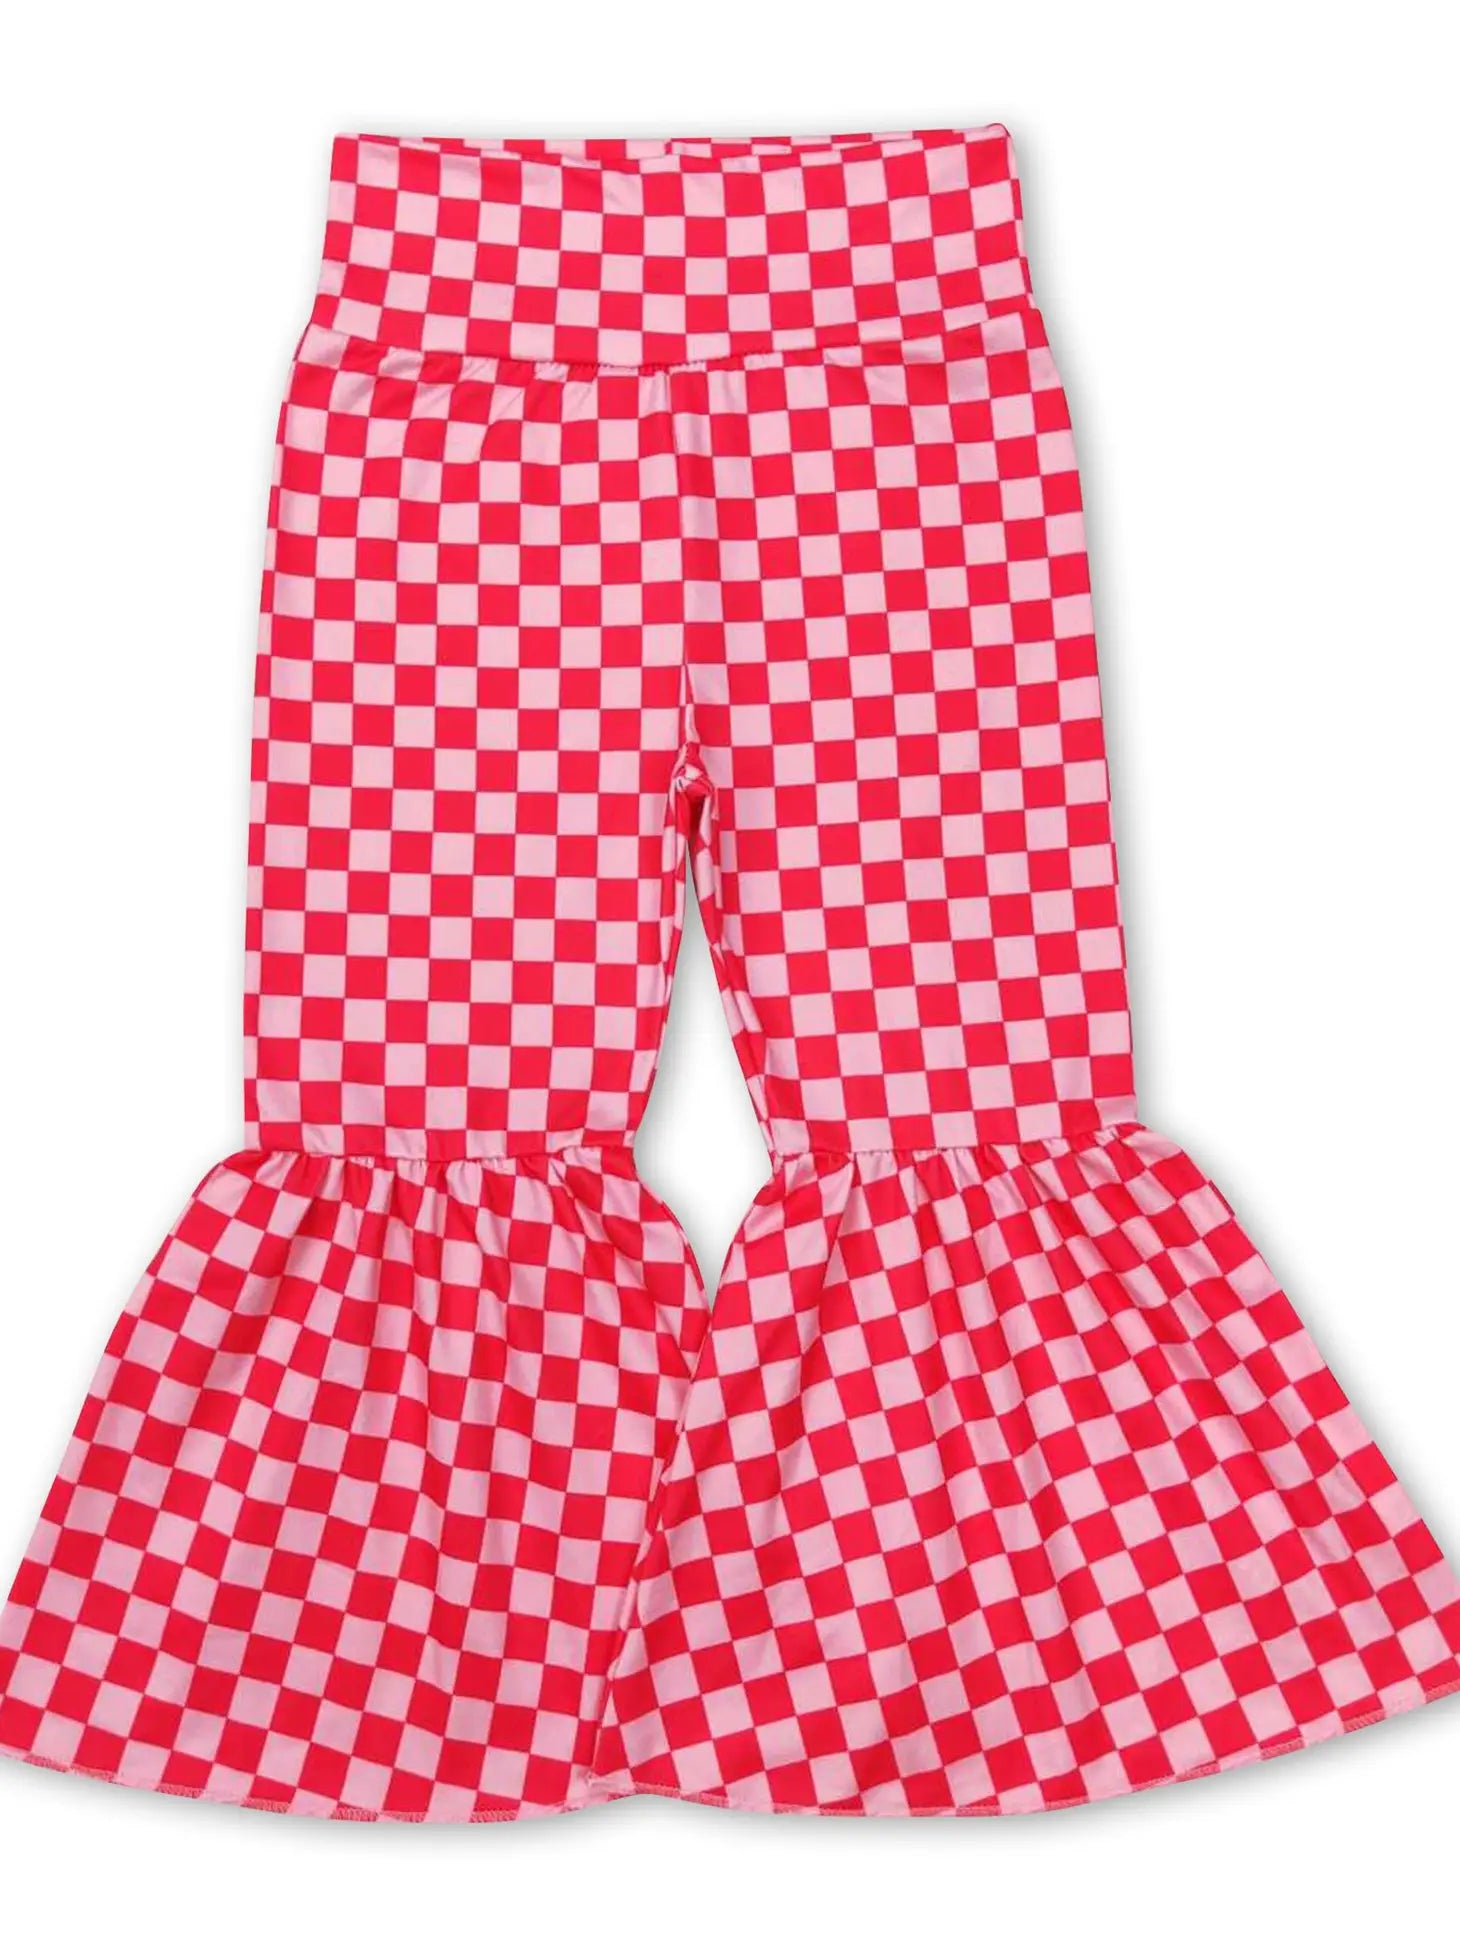 Checkerboard Pink Lovers Bells-Pants-Deadwood South Boutique & Company-Deadwood South Boutique, Women's Fashion Boutique in Henderson, TX